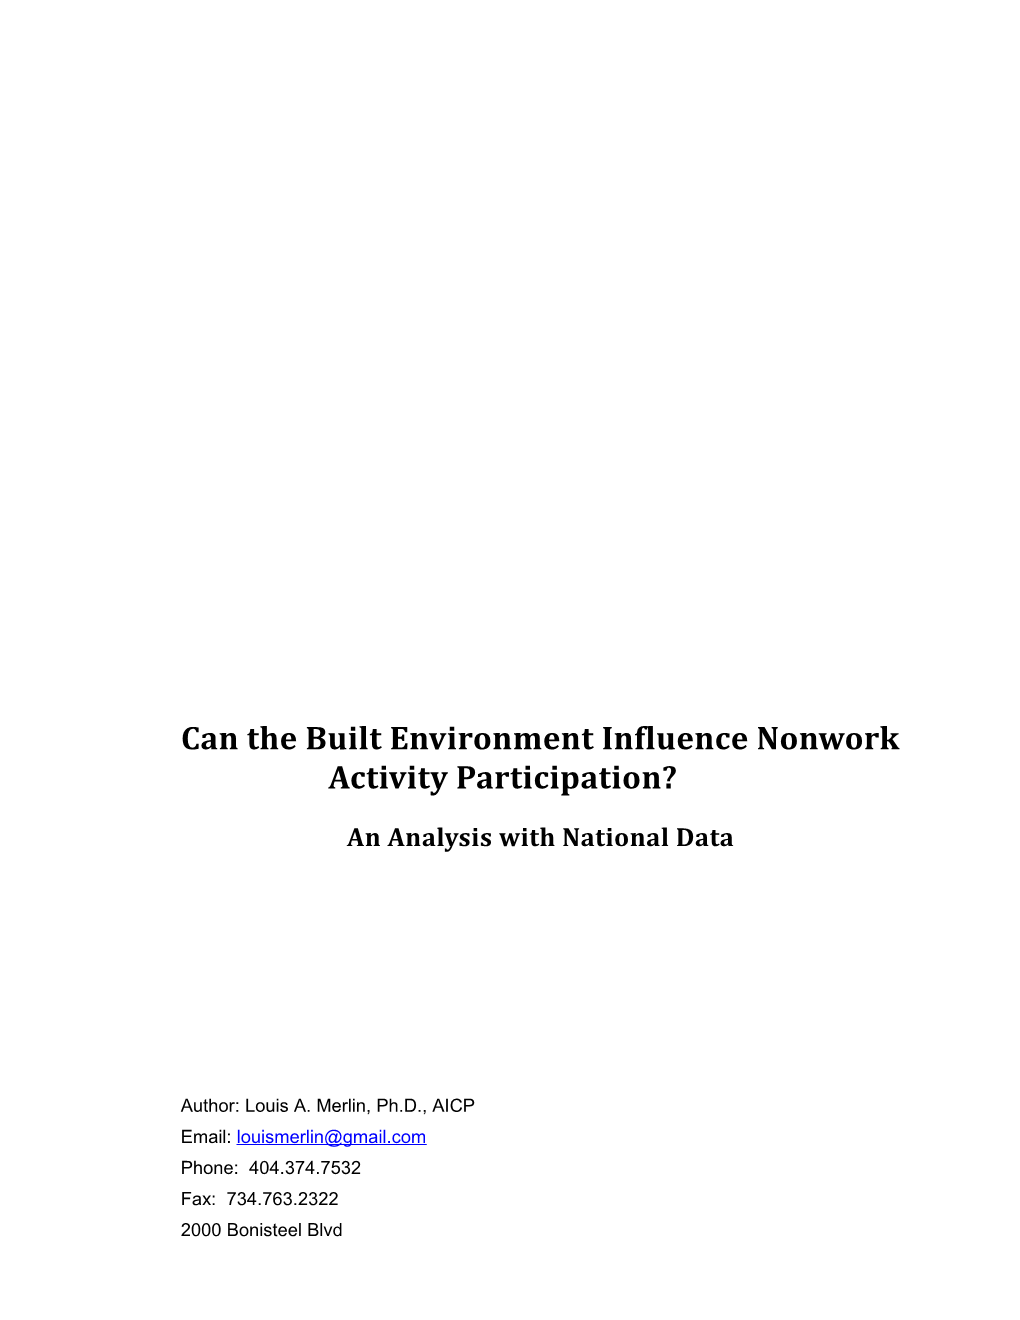 Can the Built Environment Influence Nonwork Activity Participation?